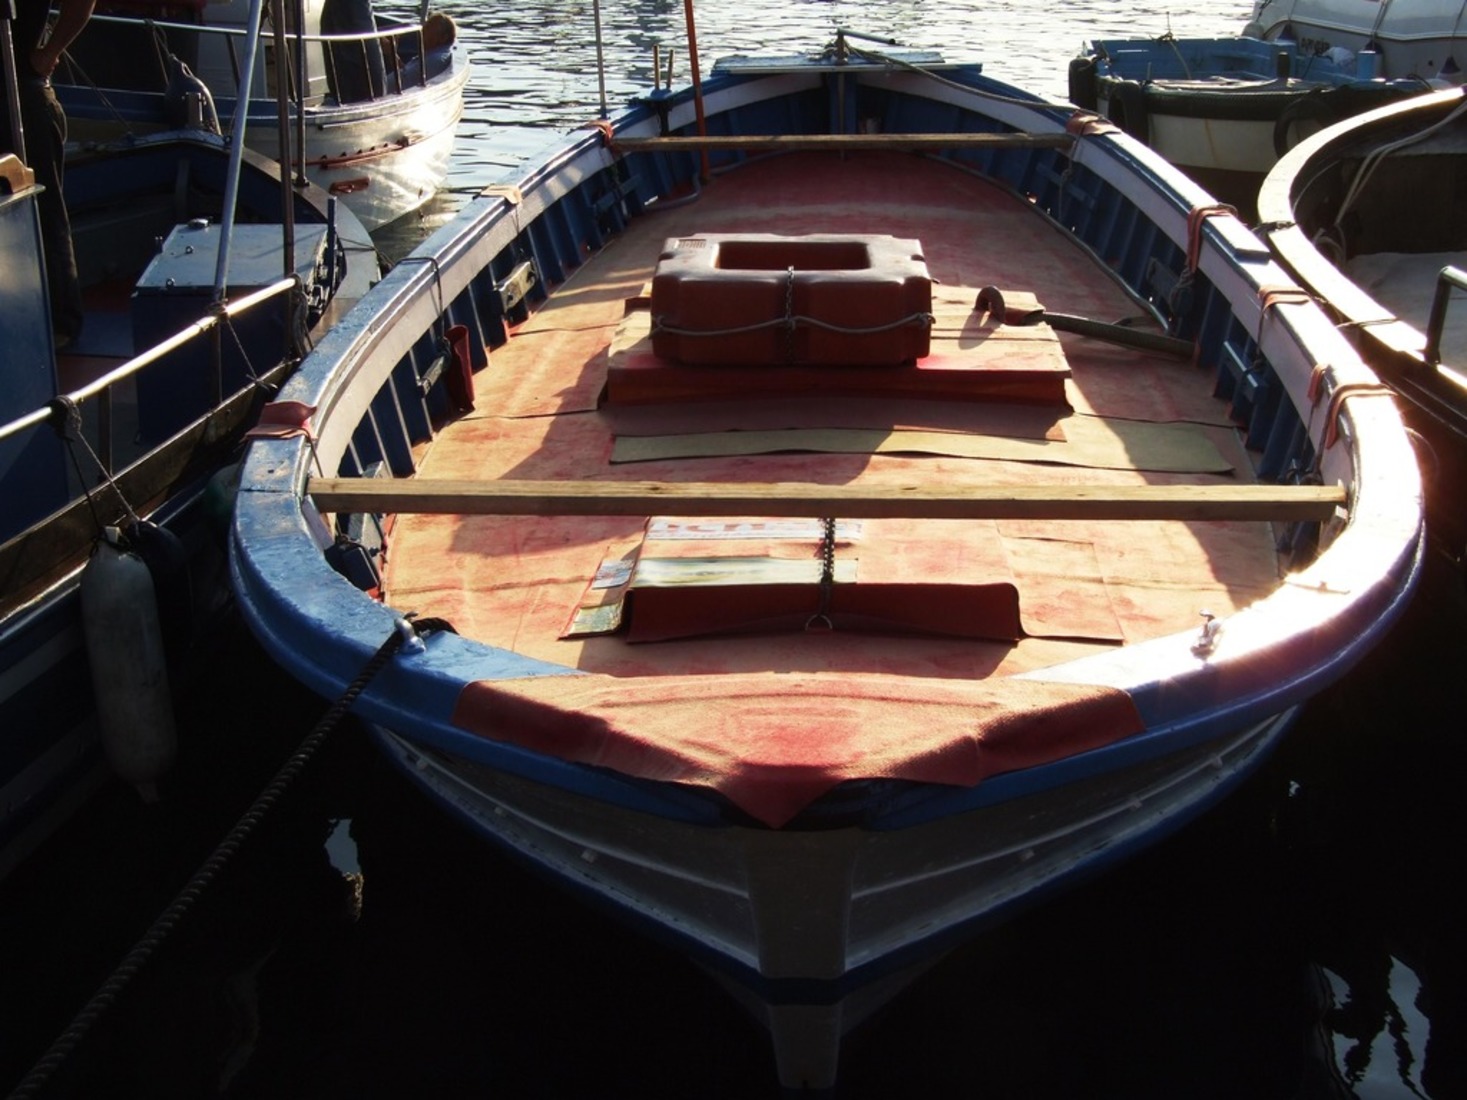 the empty wooden boat docked is ready to be picked